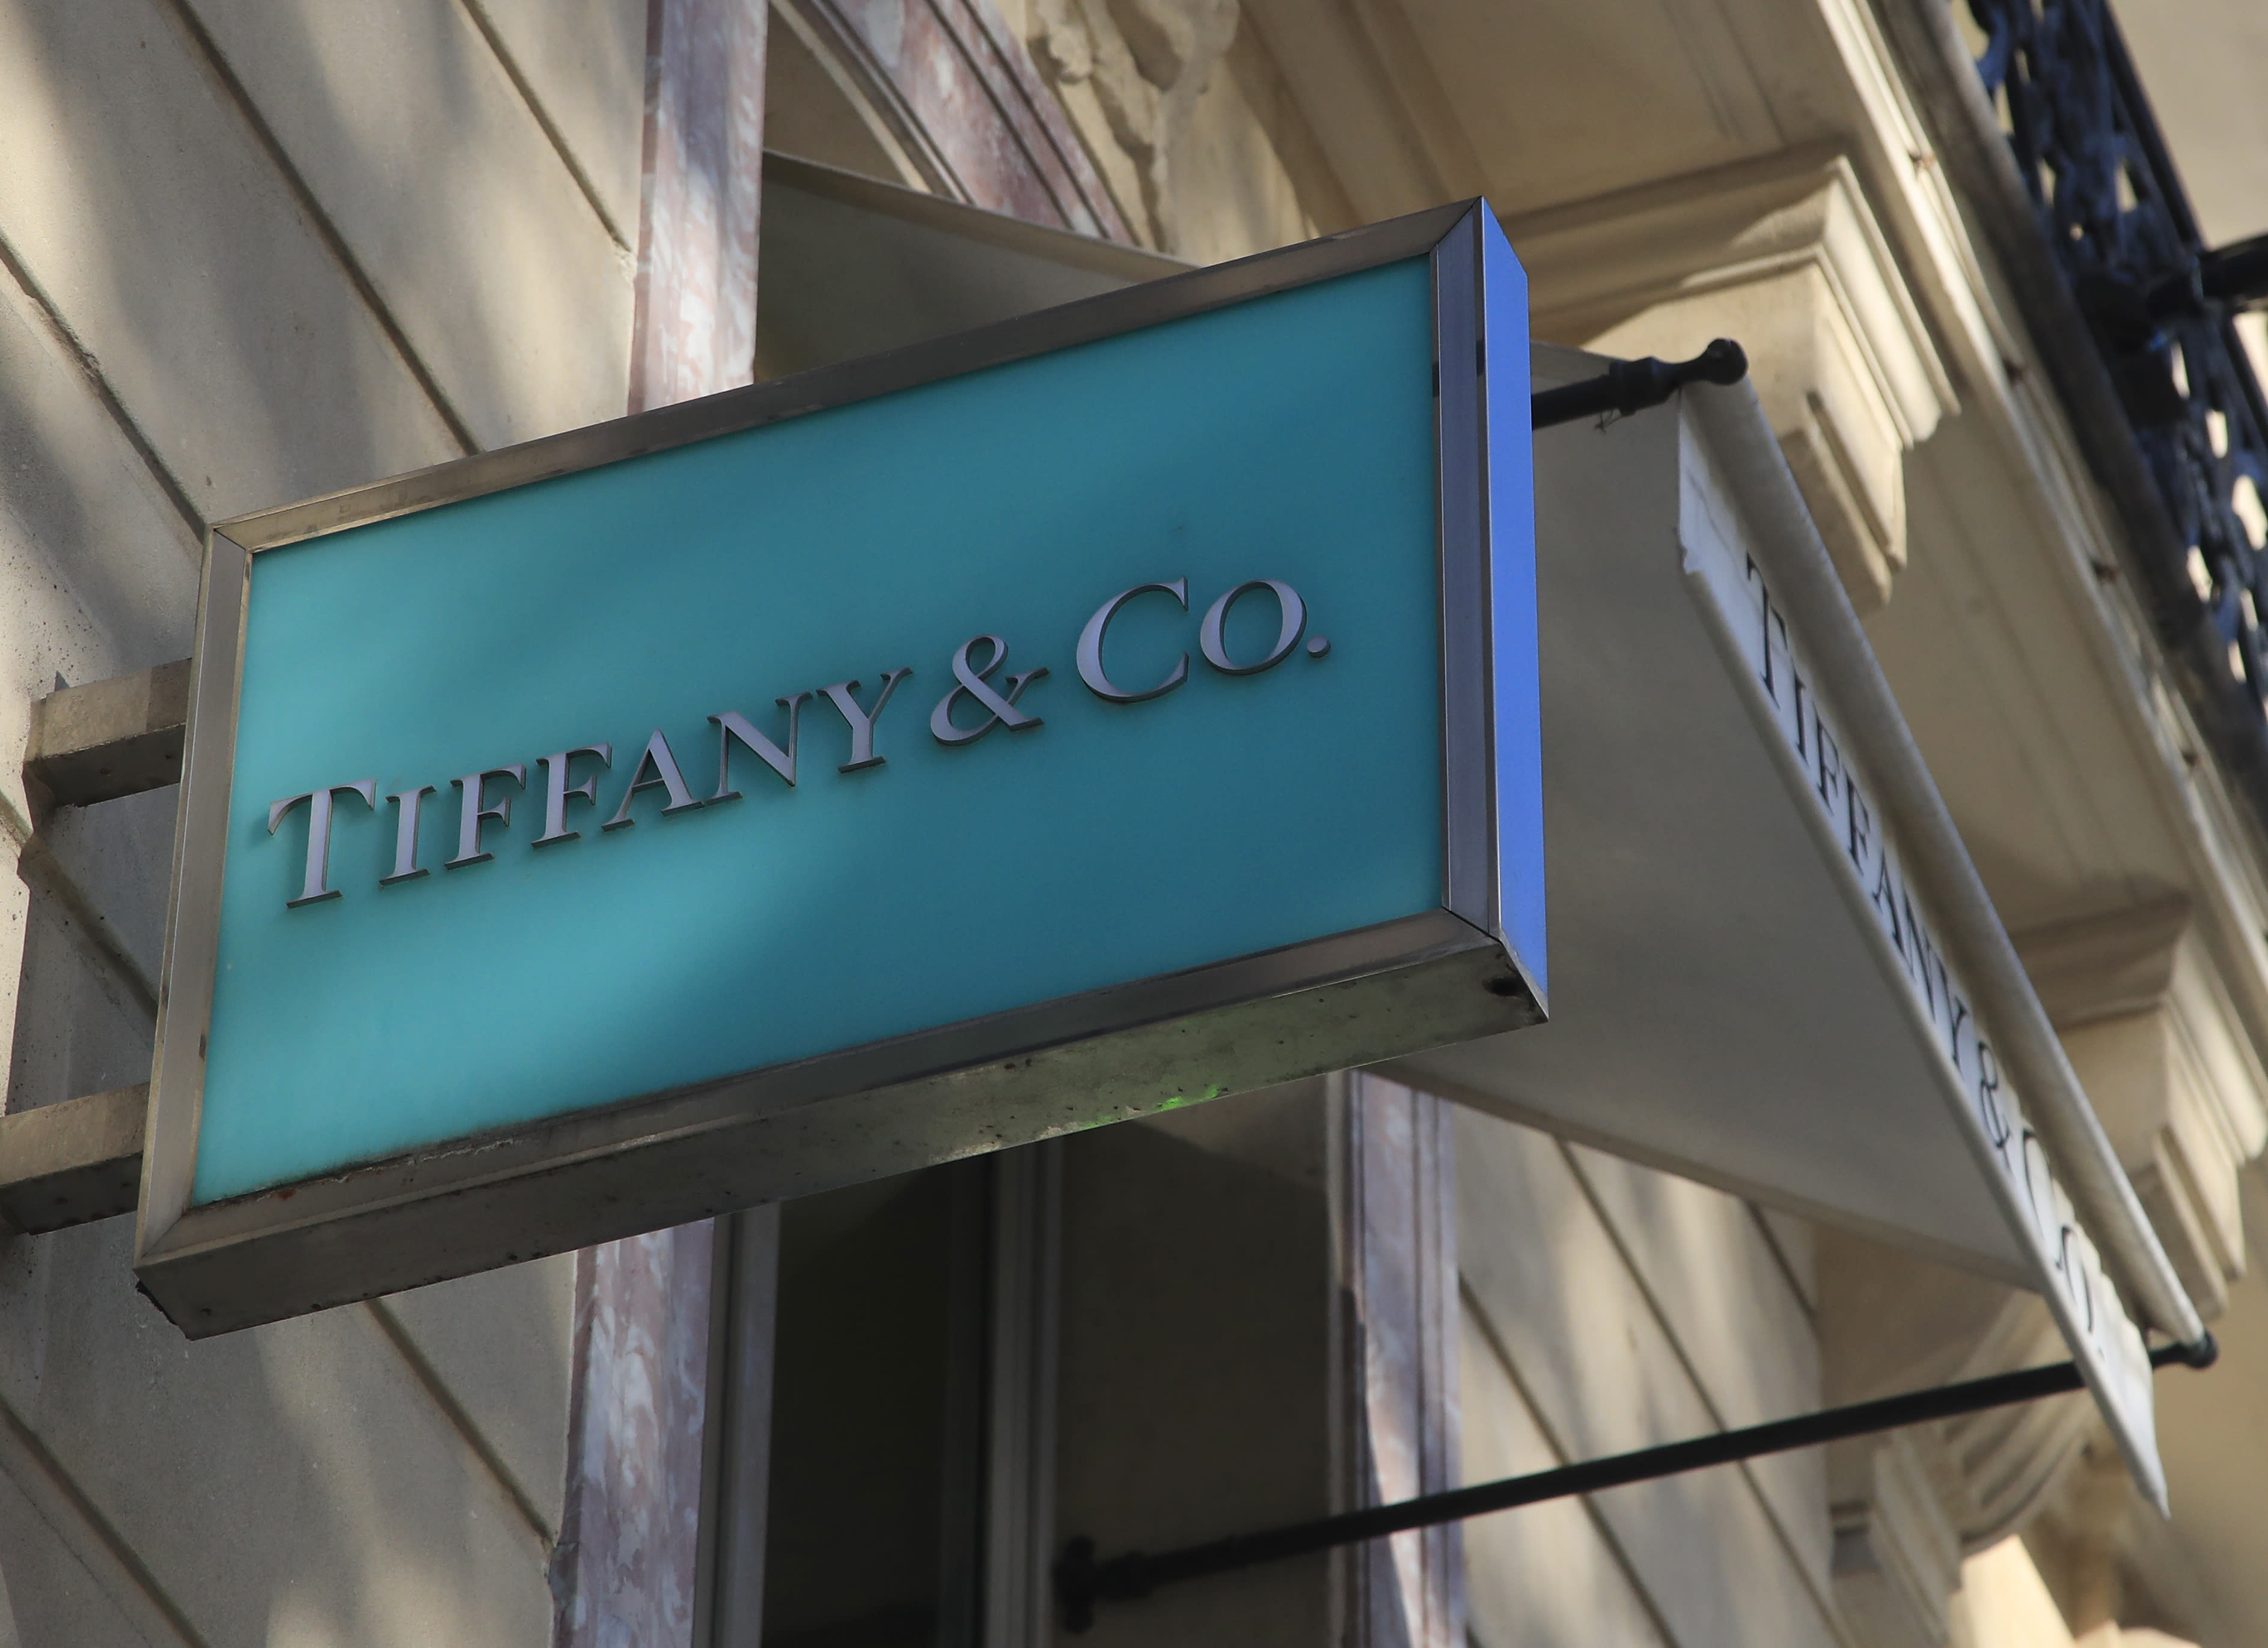 Tiffany & Co. Courts Millennials in China With Massive, and